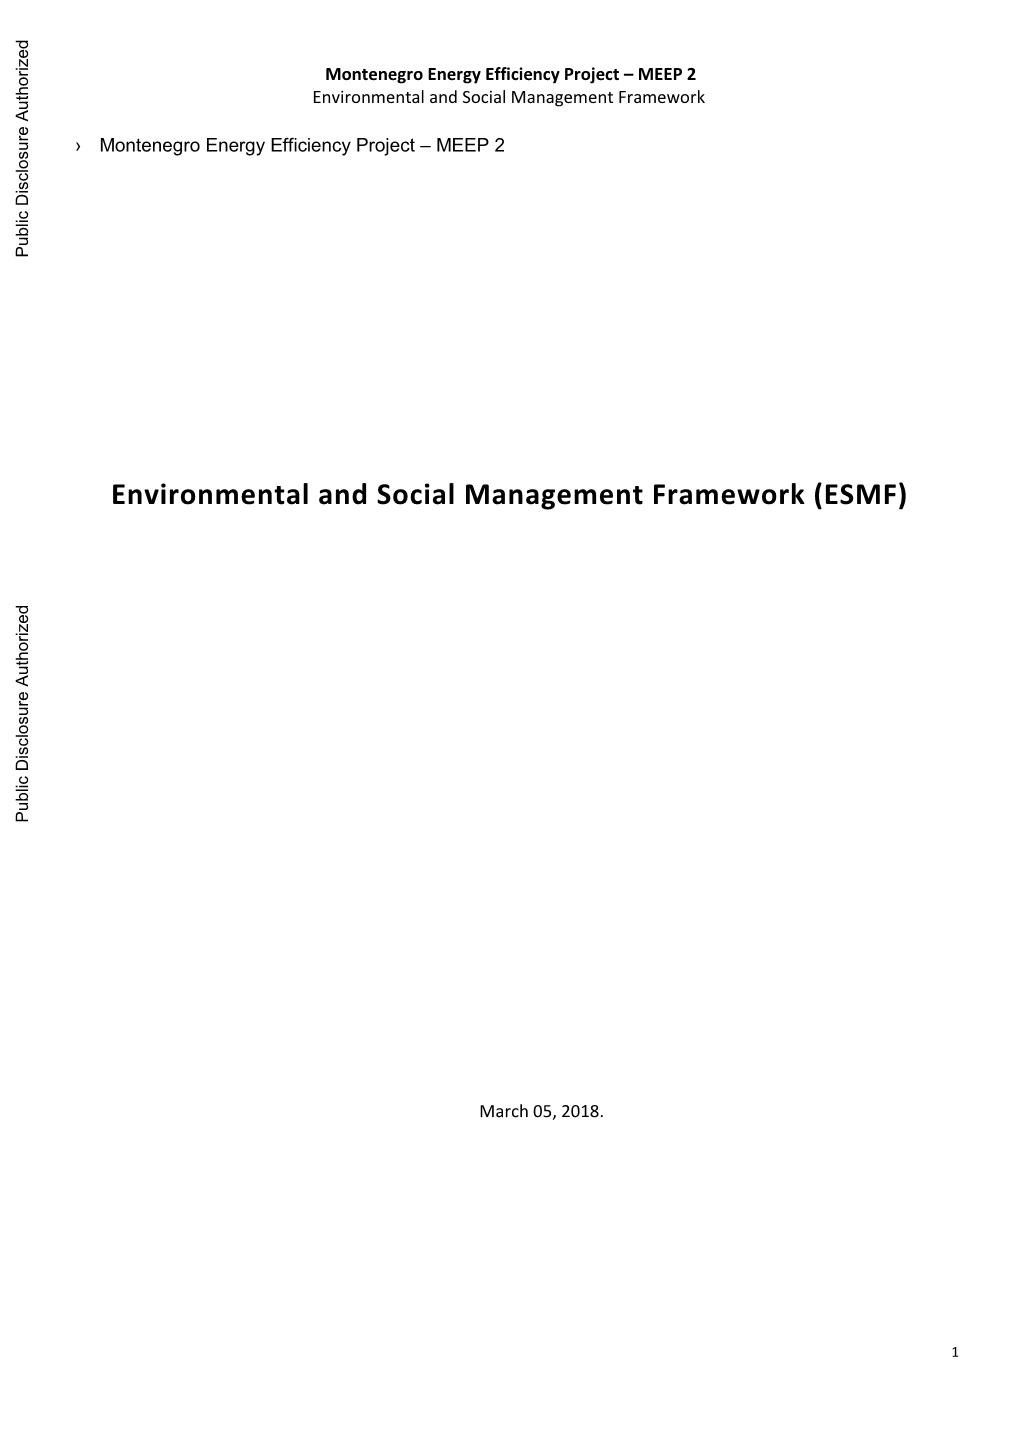 Montenegro Energy Efficiency Project – MEEP 2 Environmental and Social Management Framework